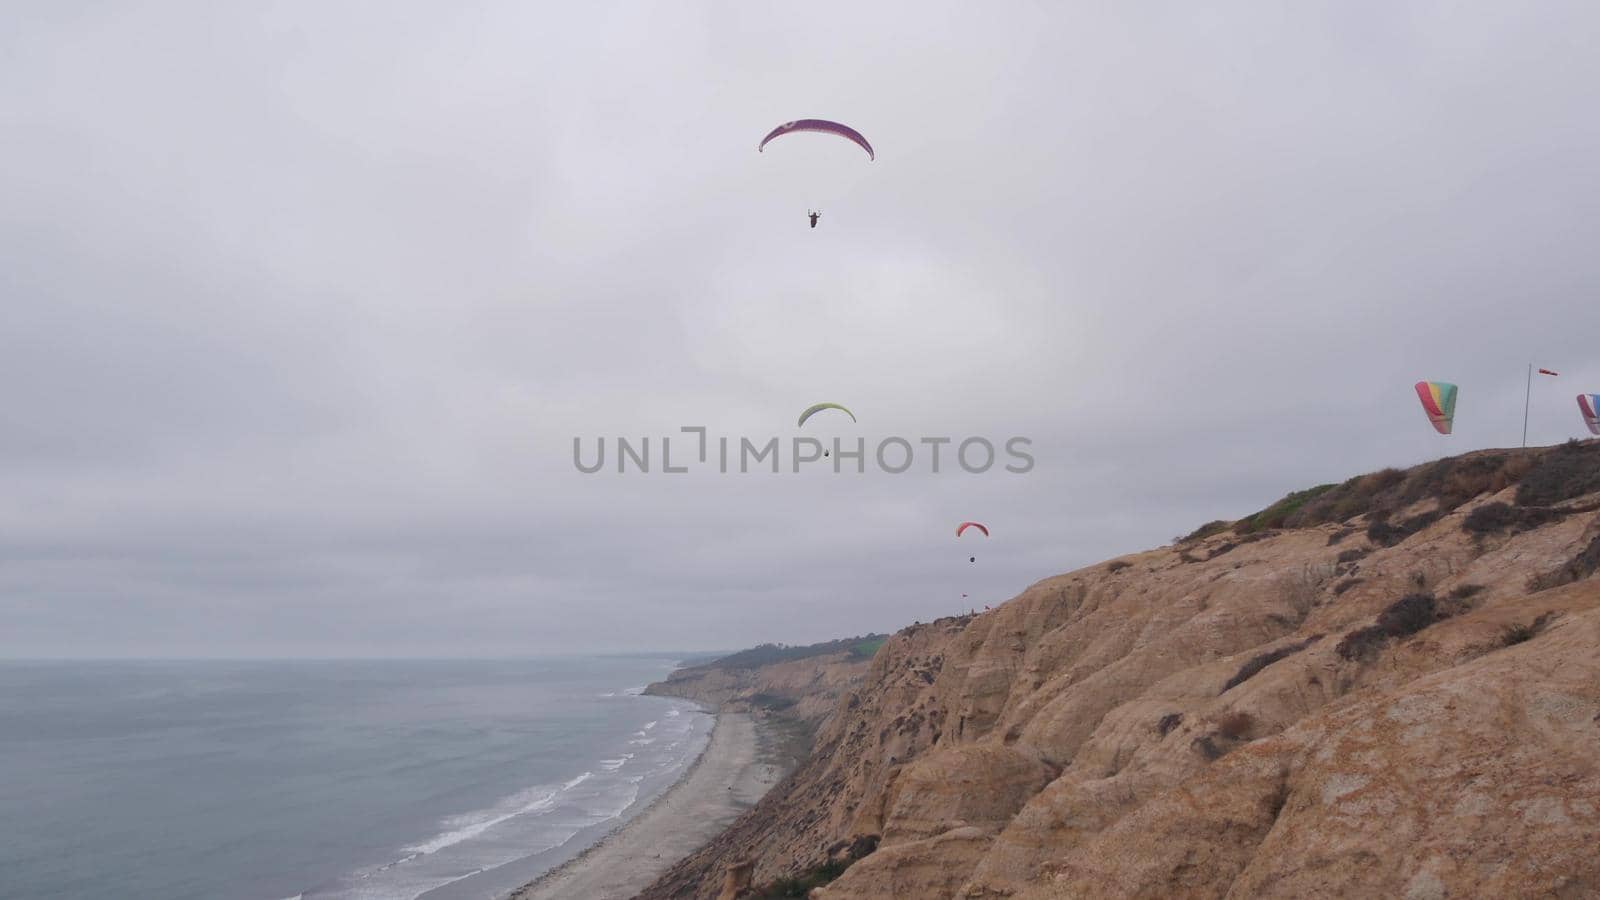 People paragliding, Torrey Pines cliff or bluff. Paraglider soaring in sky air, flying on parachute, kite or wing. Recreational sport hobby. Ocean coast, San Diego, California USA. Para gliding flight